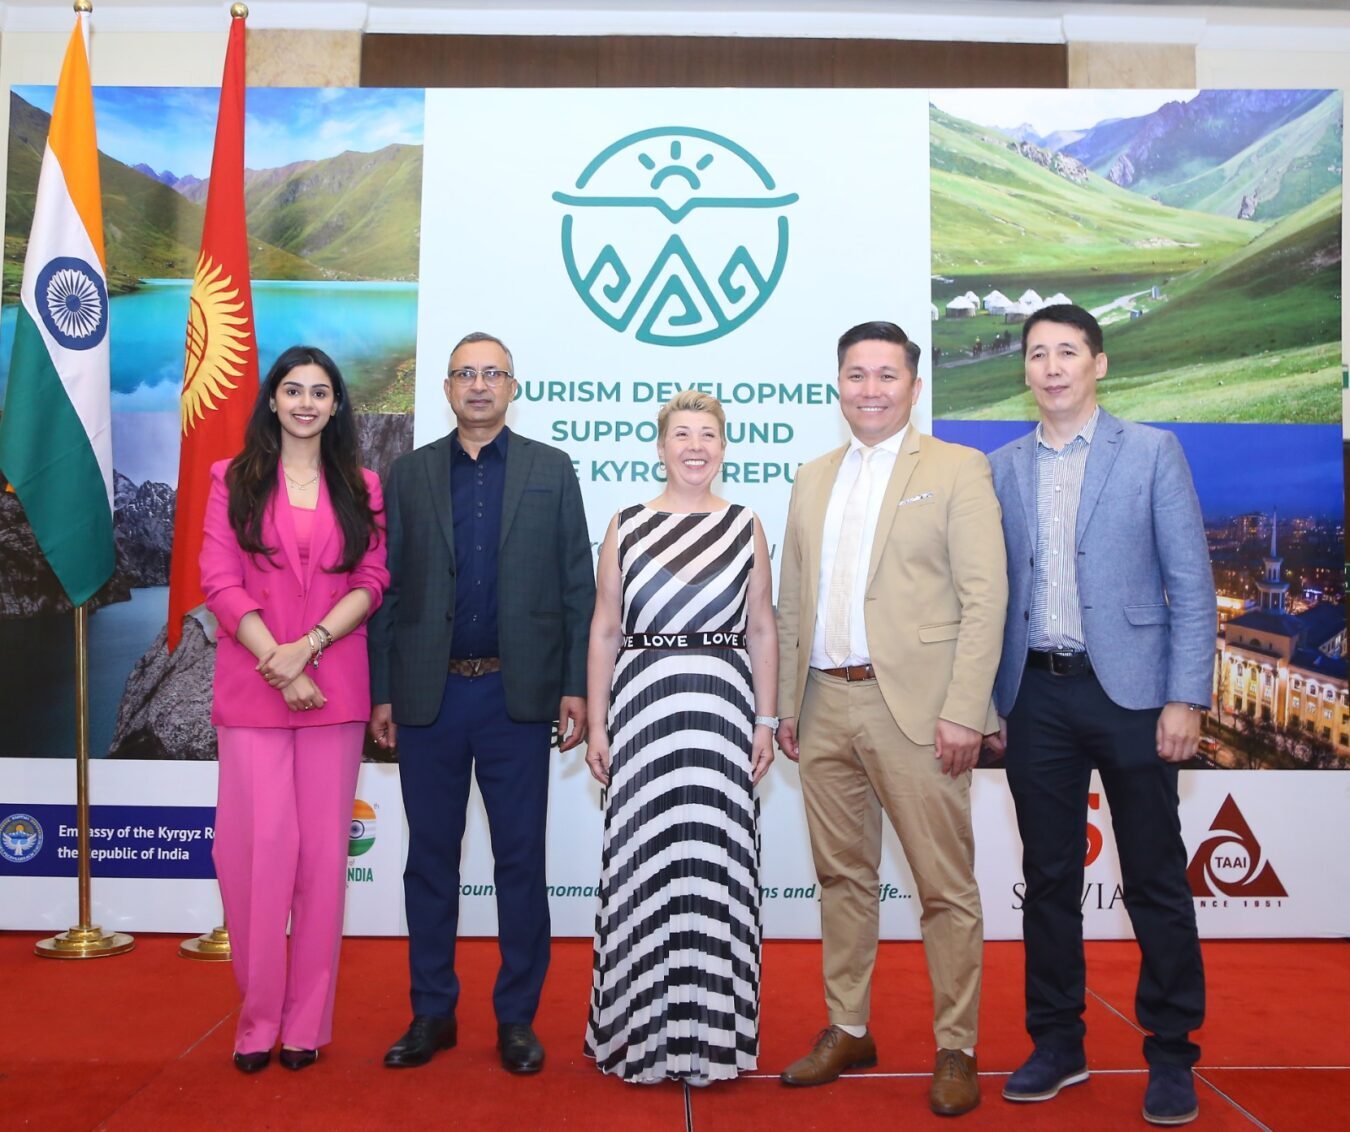 Kyrgyz Republic holds two-city roadshow in India